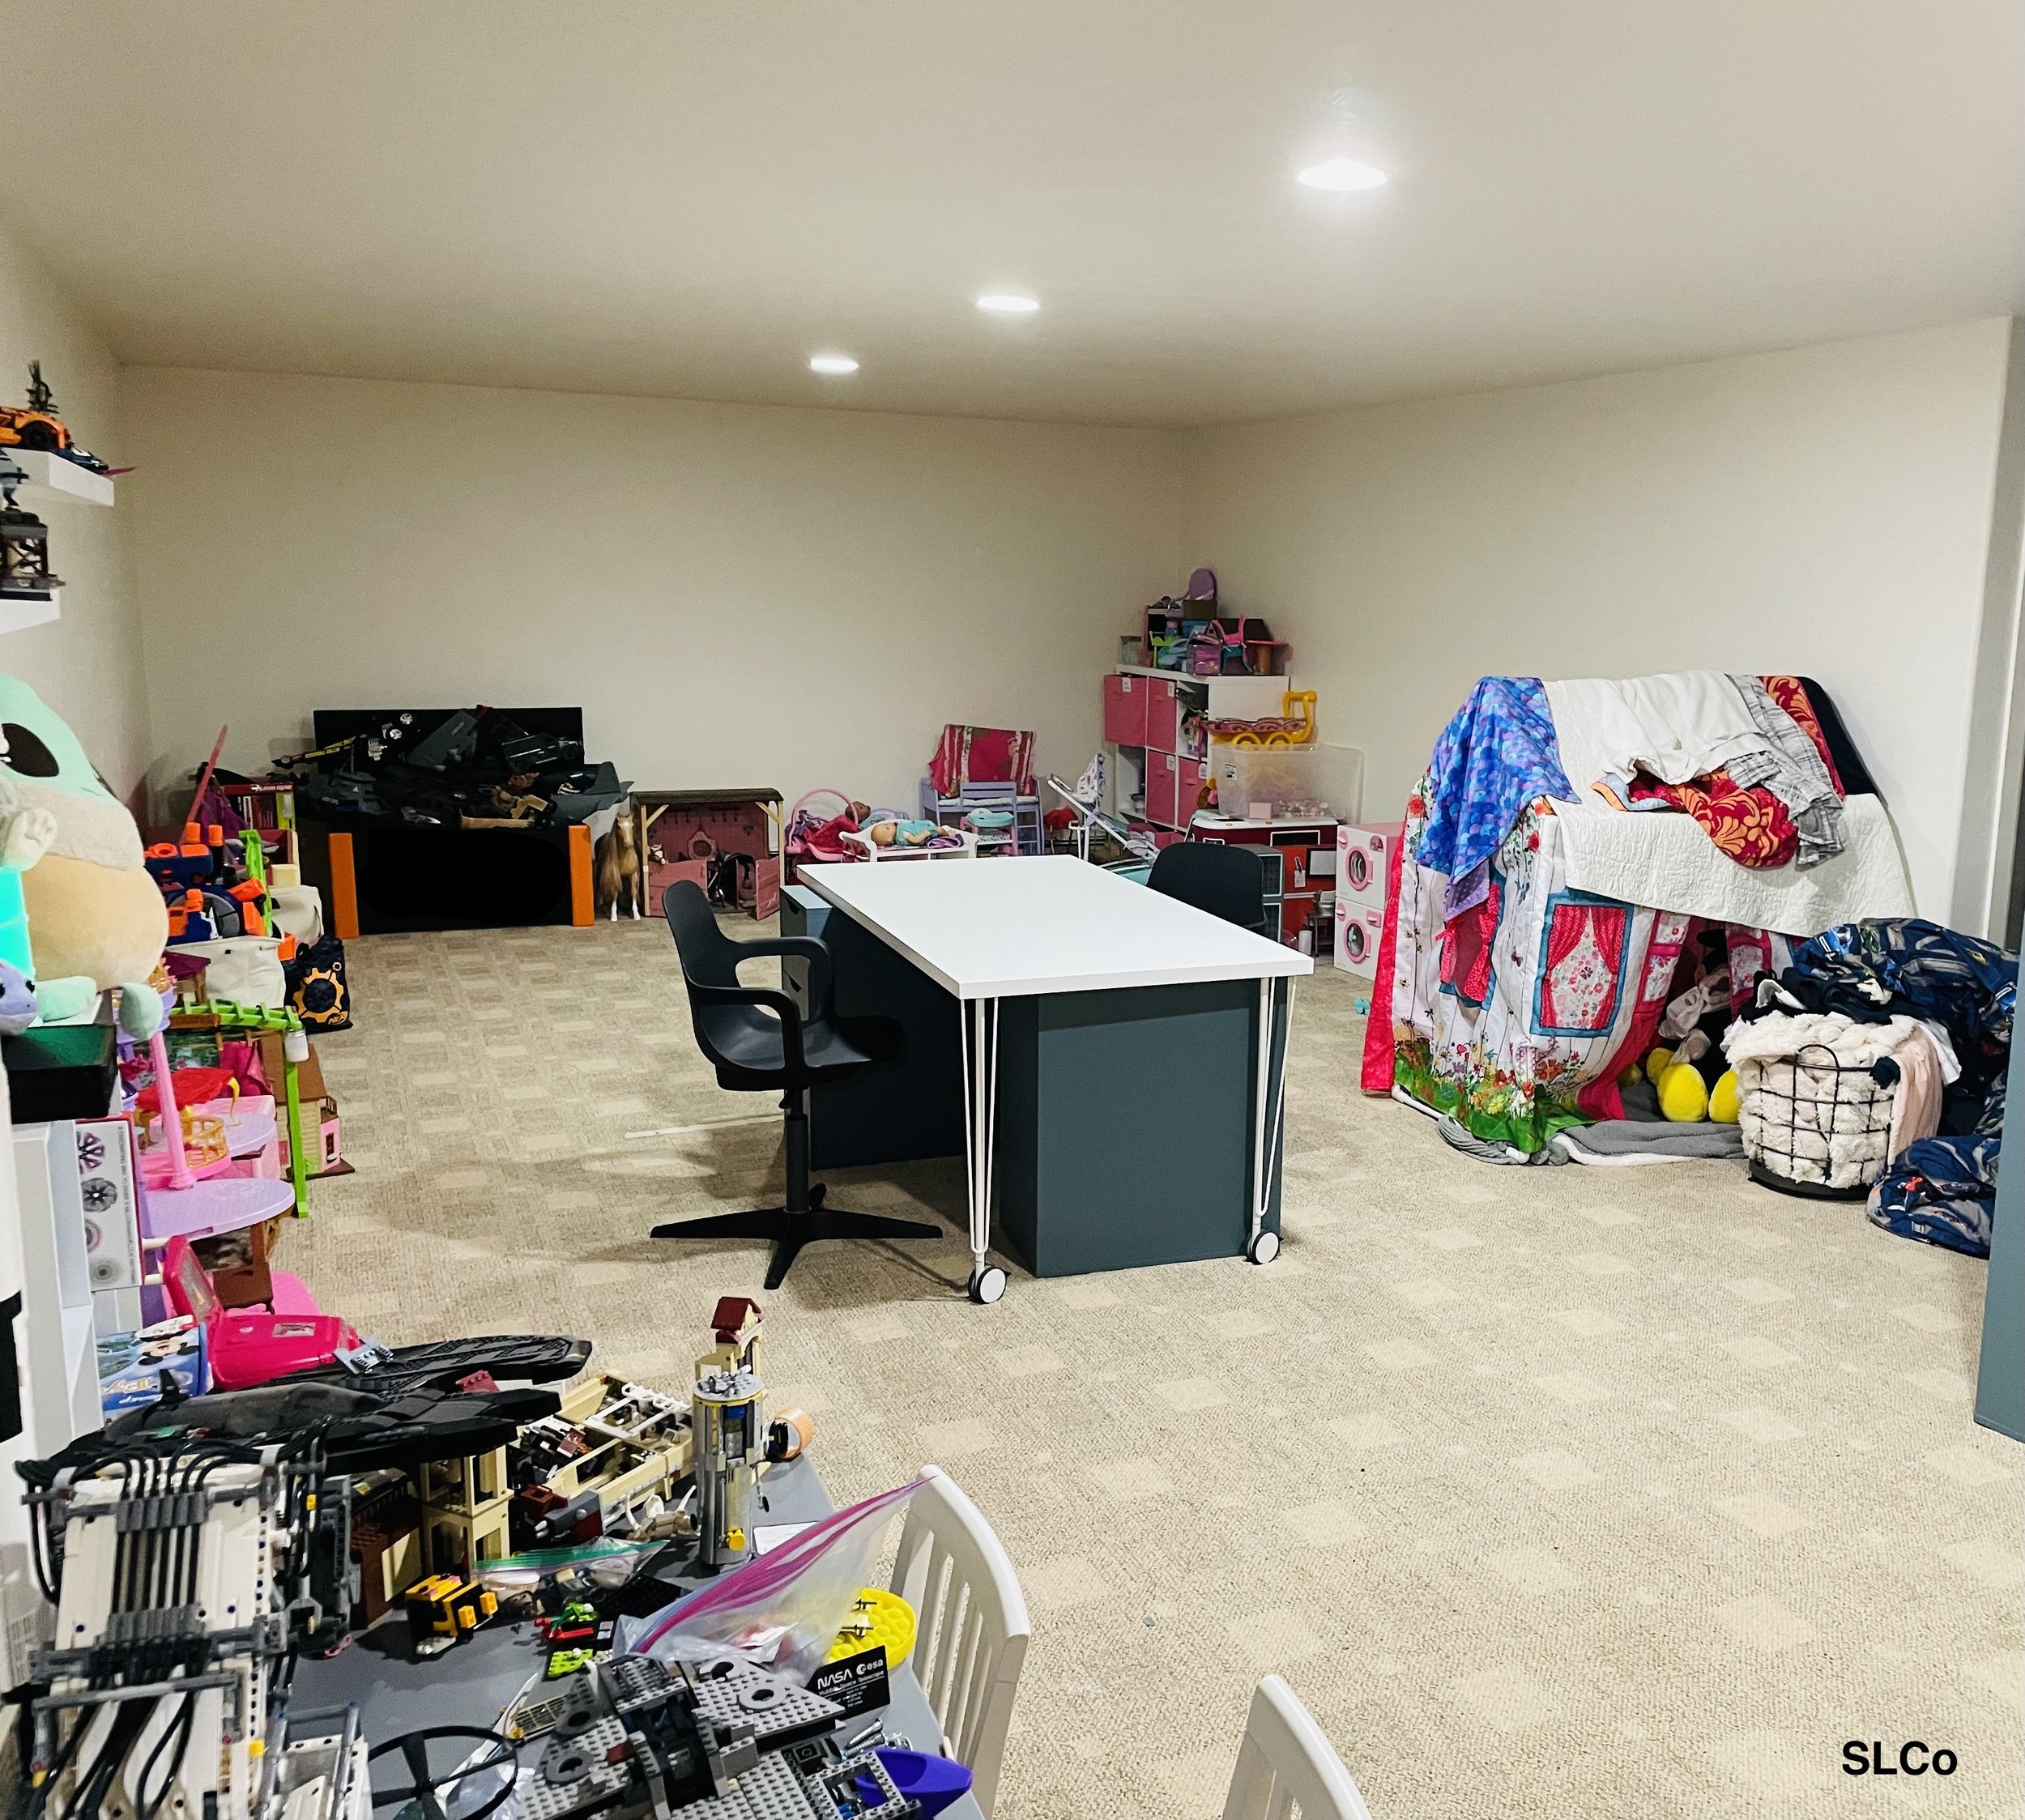 After photo of playroom with a clean desk in the middle of the room, clothes and toys around the walls organized on shelves.